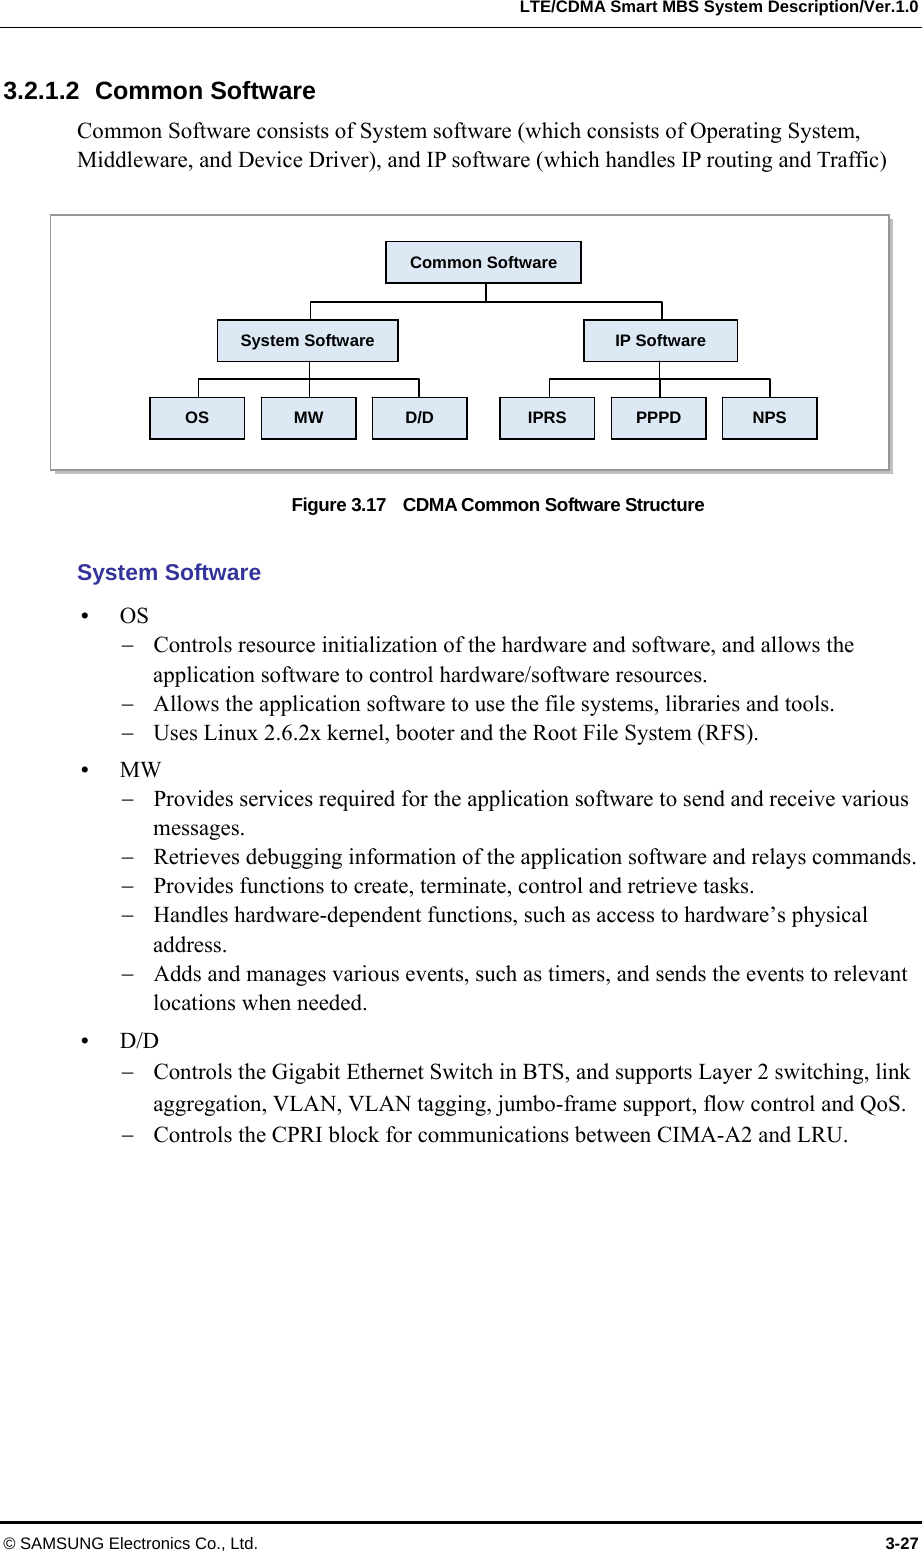   LTE/CDMA Smart MBS System Description/Ver.1.0 © SAMSUNG Electronics Co., Ltd.  3-27 3.2.1.2 Common Software Common Software consists of System software (which consists of Operating System, Middleware, and Device Driver), and IP software (which handles IP routing and Traffic)  Figure 3.17    CDMA Common Software Structure  System Software  OS  Controls resource initialization of the hardware and software, and allows the application software to control hardware/software resources.  Allows the application software to use the file systems, libraries and tools.  Uses Linux 2.6.2x kernel, booter and the Root File System (RFS).  MW  Provides services required for the application software to send and receive various messages.  Retrieves debugging information of the application software and relays commands.  Provides functions to create, terminate, control and retrieve tasks.  Handles hardware-dependent functions, such as access to hardware’s physical address.  Adds and manages various events, such as timers, and sends the events to relevant locations when needed.  D/D  Controls the Gigabit Ethernet Switch in BTS, and supports Layer 2 switching, link aggregation, VLAN, VLAN tagging, jumbo-frame support, flow control and QoS.  Controls the CPRI block for communications between CIMA-A2 and LRU.  Common Software System Software  IP Software OS  MW  D/D  IPRS  PPPD  NPS 